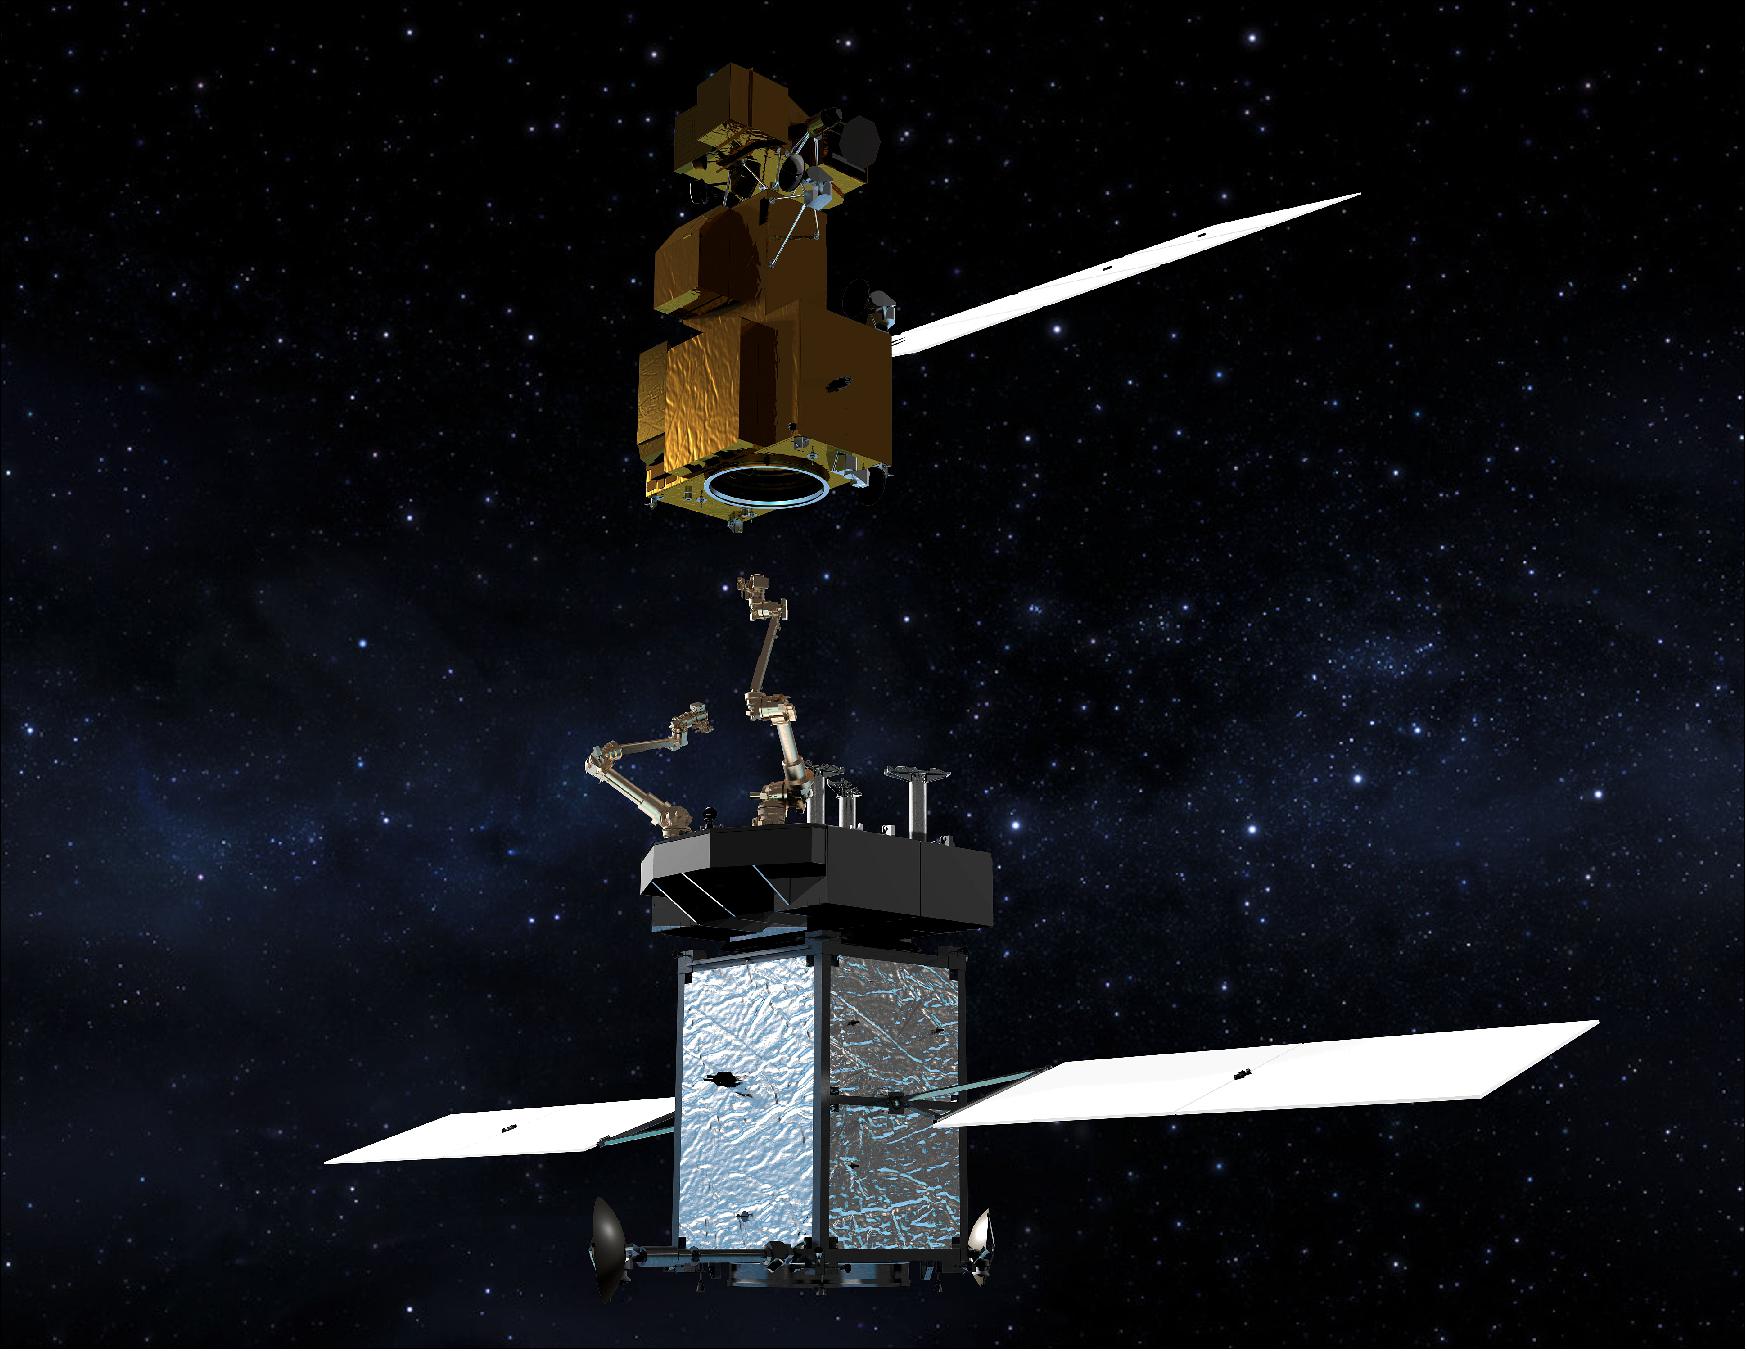 Figure 2: Artist's rendering of the Restore-L servicer extending its robotic arm to grasp and refuel a client satellite on orbit (image credit: NASA)